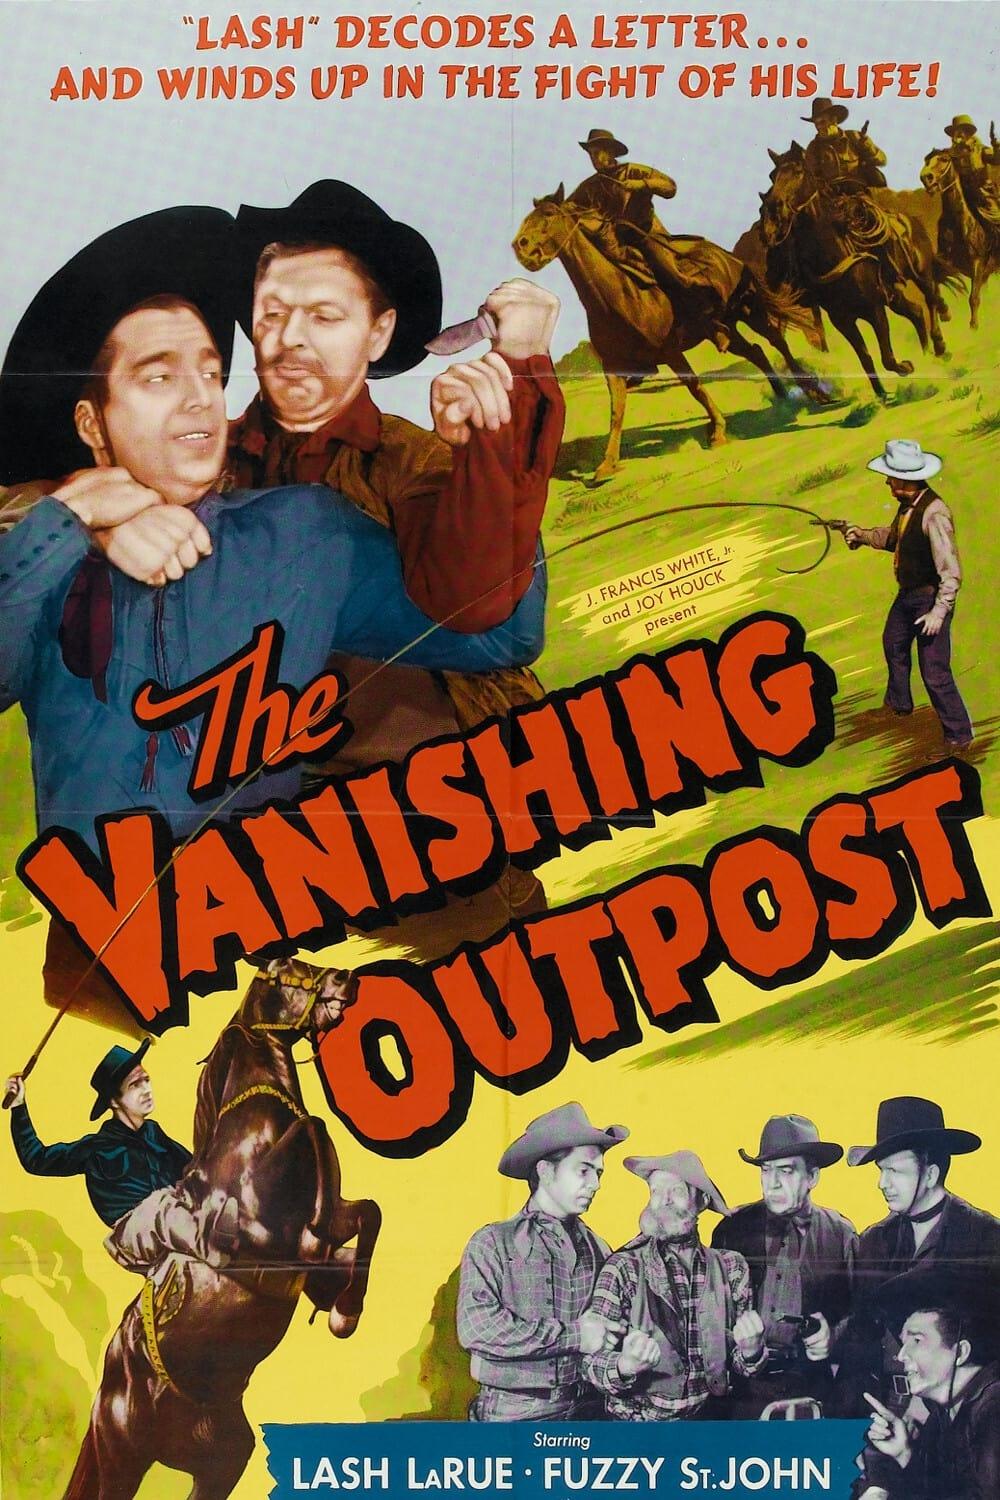 The Vanishing Outpost poster